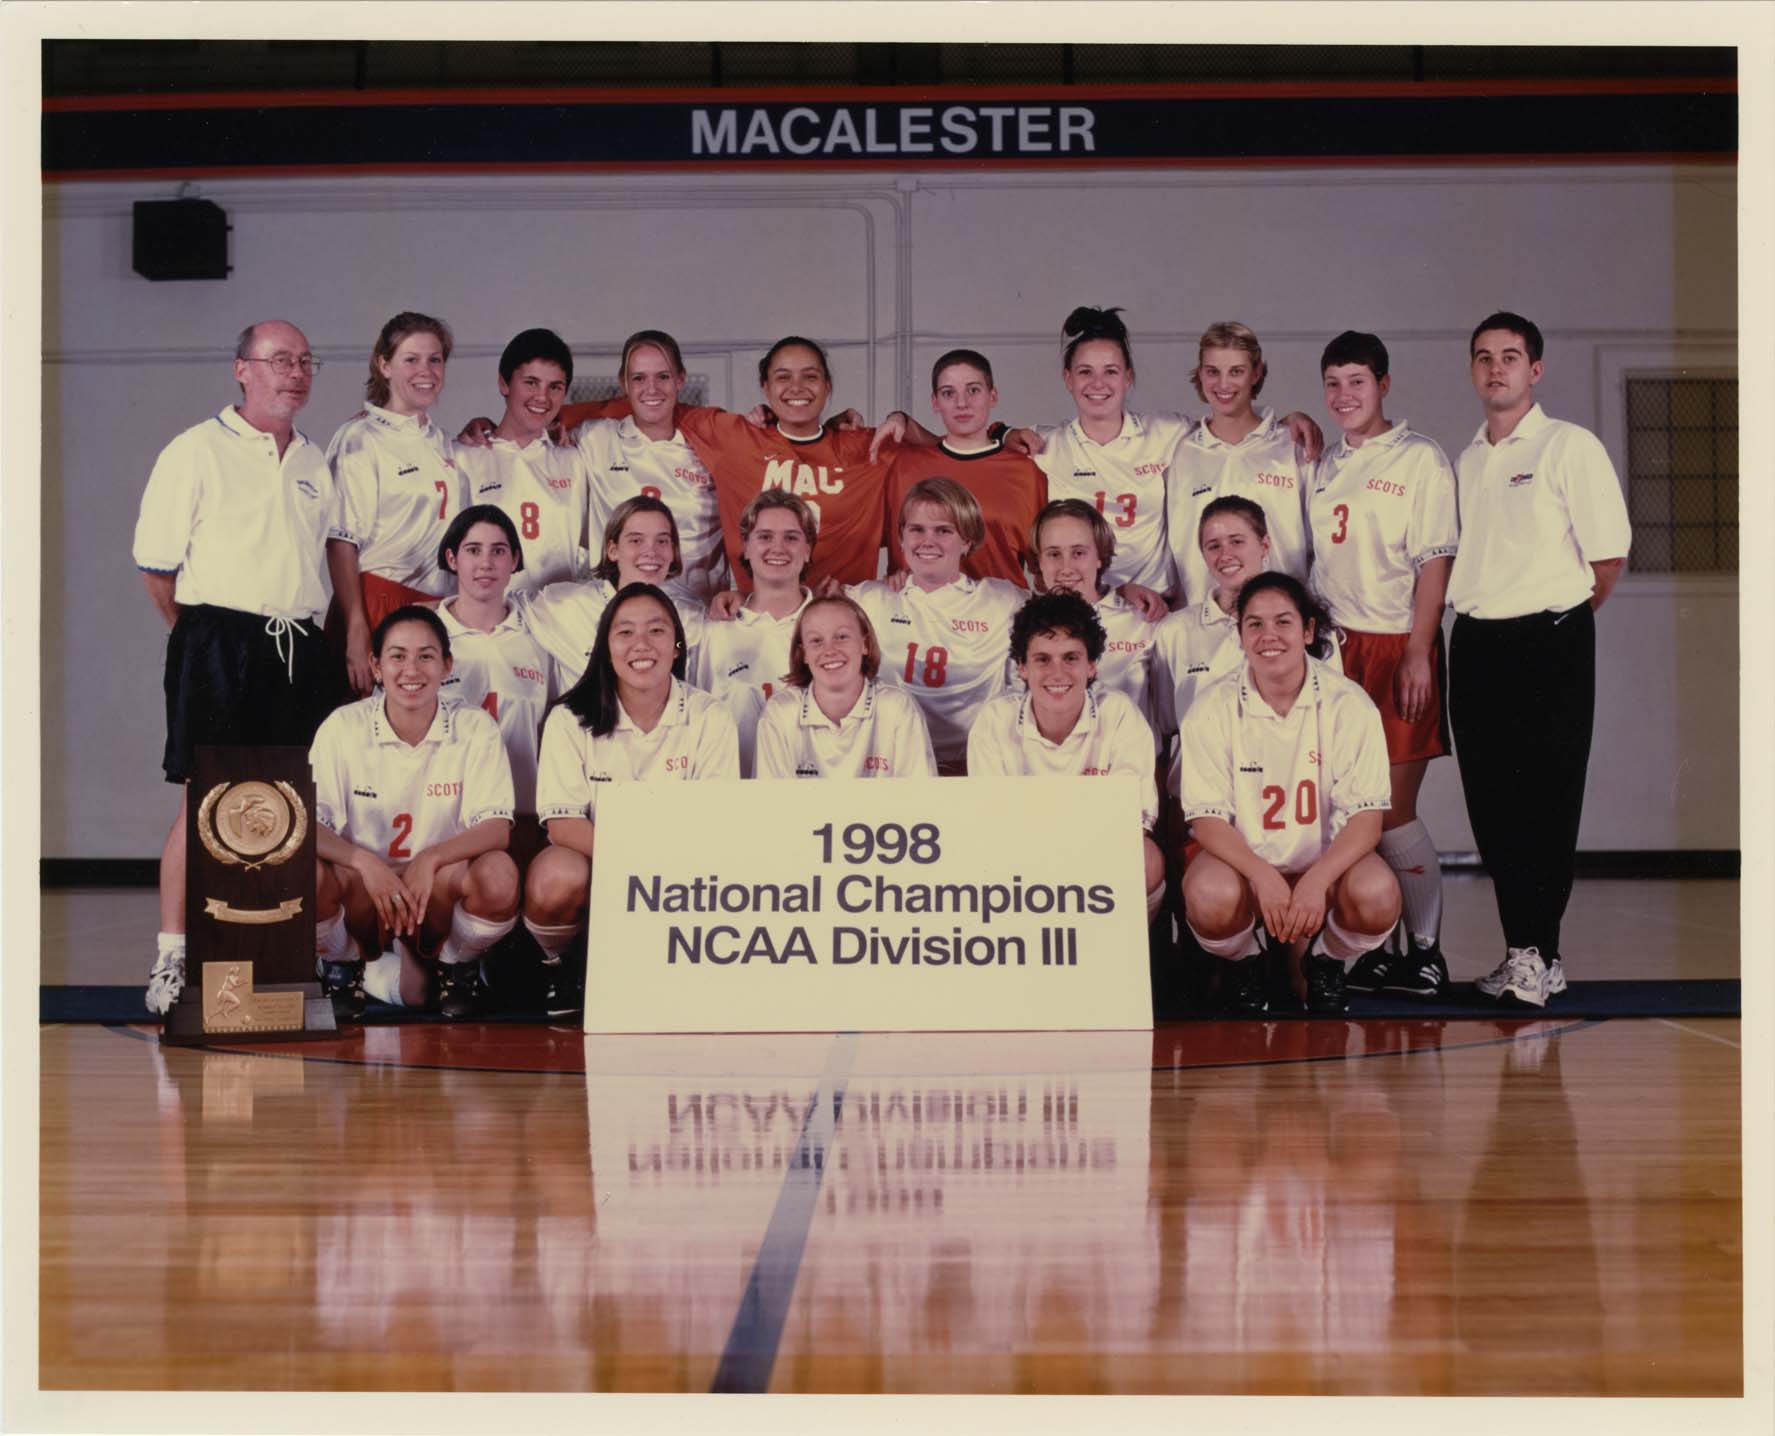 Group photo of Mac women's soccer in 1998 as National Champions for NCAA Division III